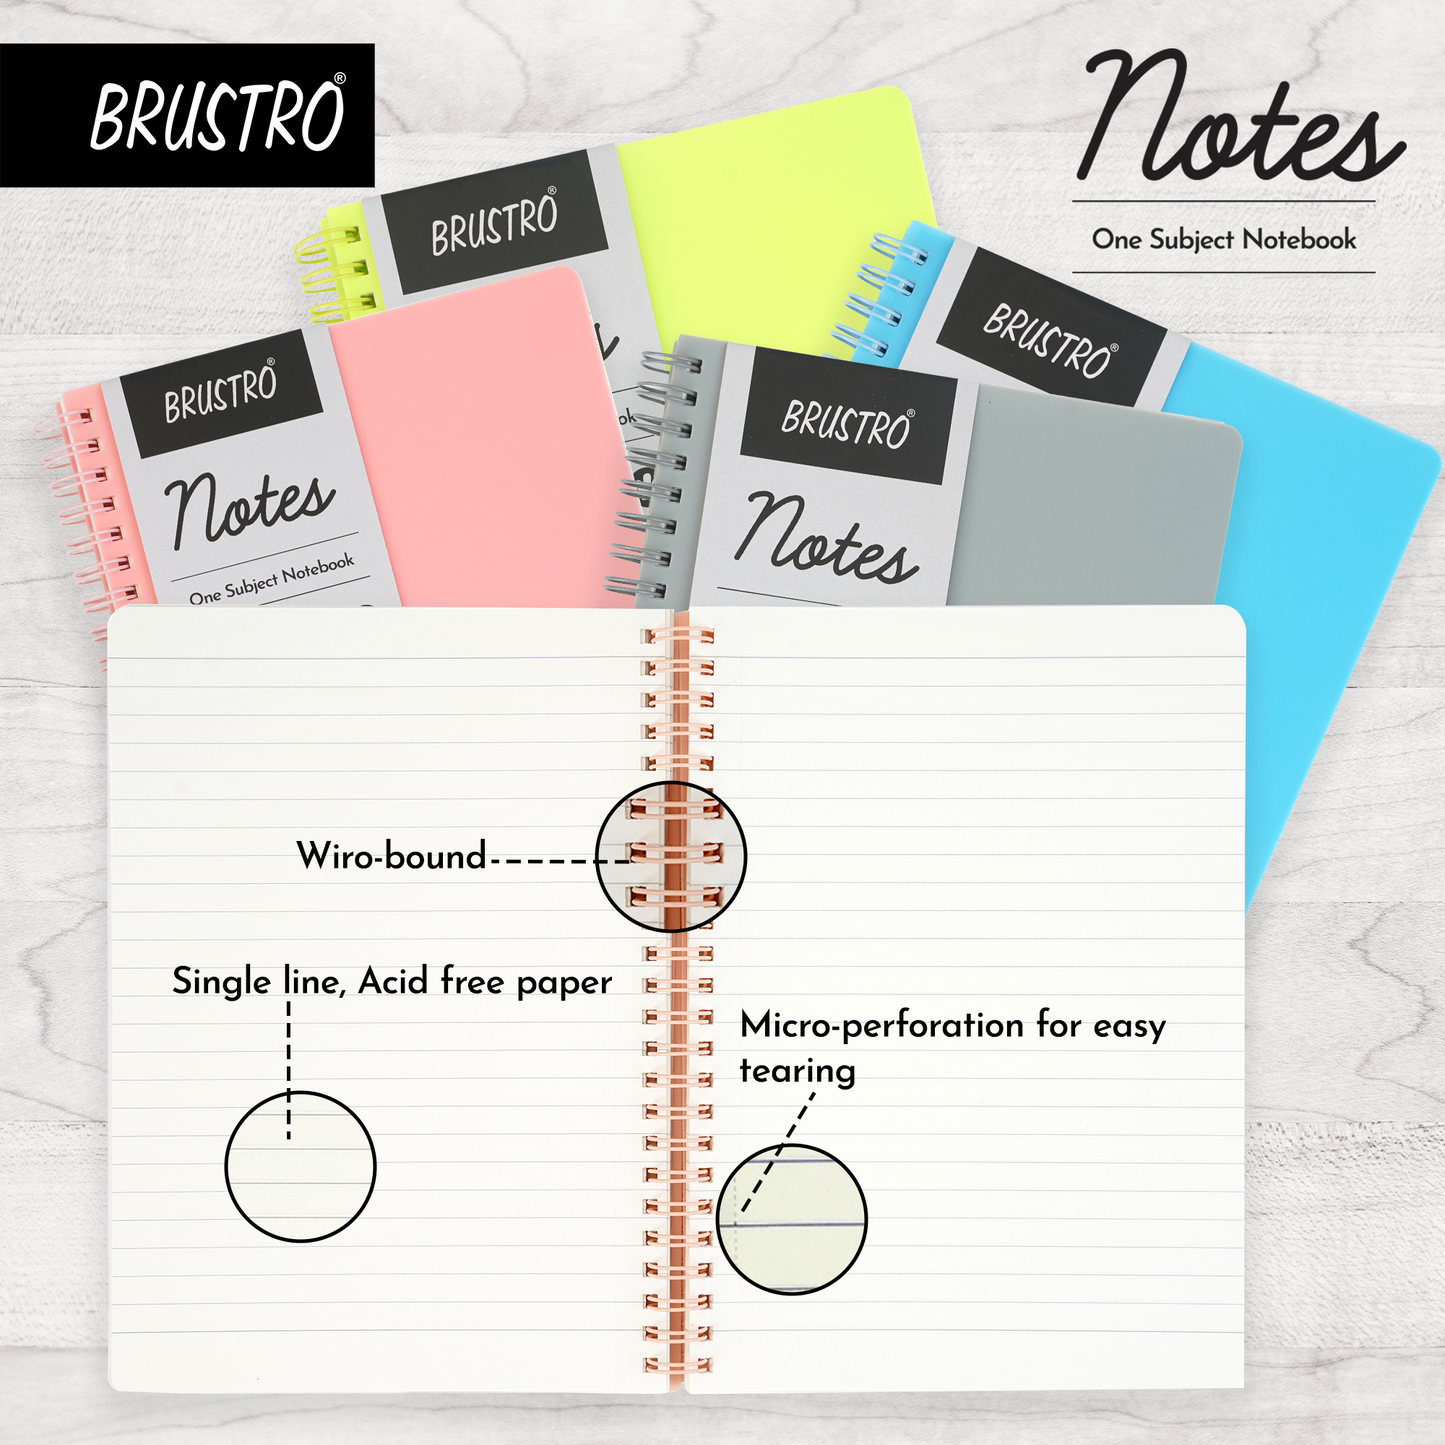 BRUSTRO Notes A5 Size,1 Subject Ruled Notebooks (Set of 5),80 sheets/160 pages,70 gsm ivory paper, Caramel/Aqua/Lime/Blush/Slate Cover,